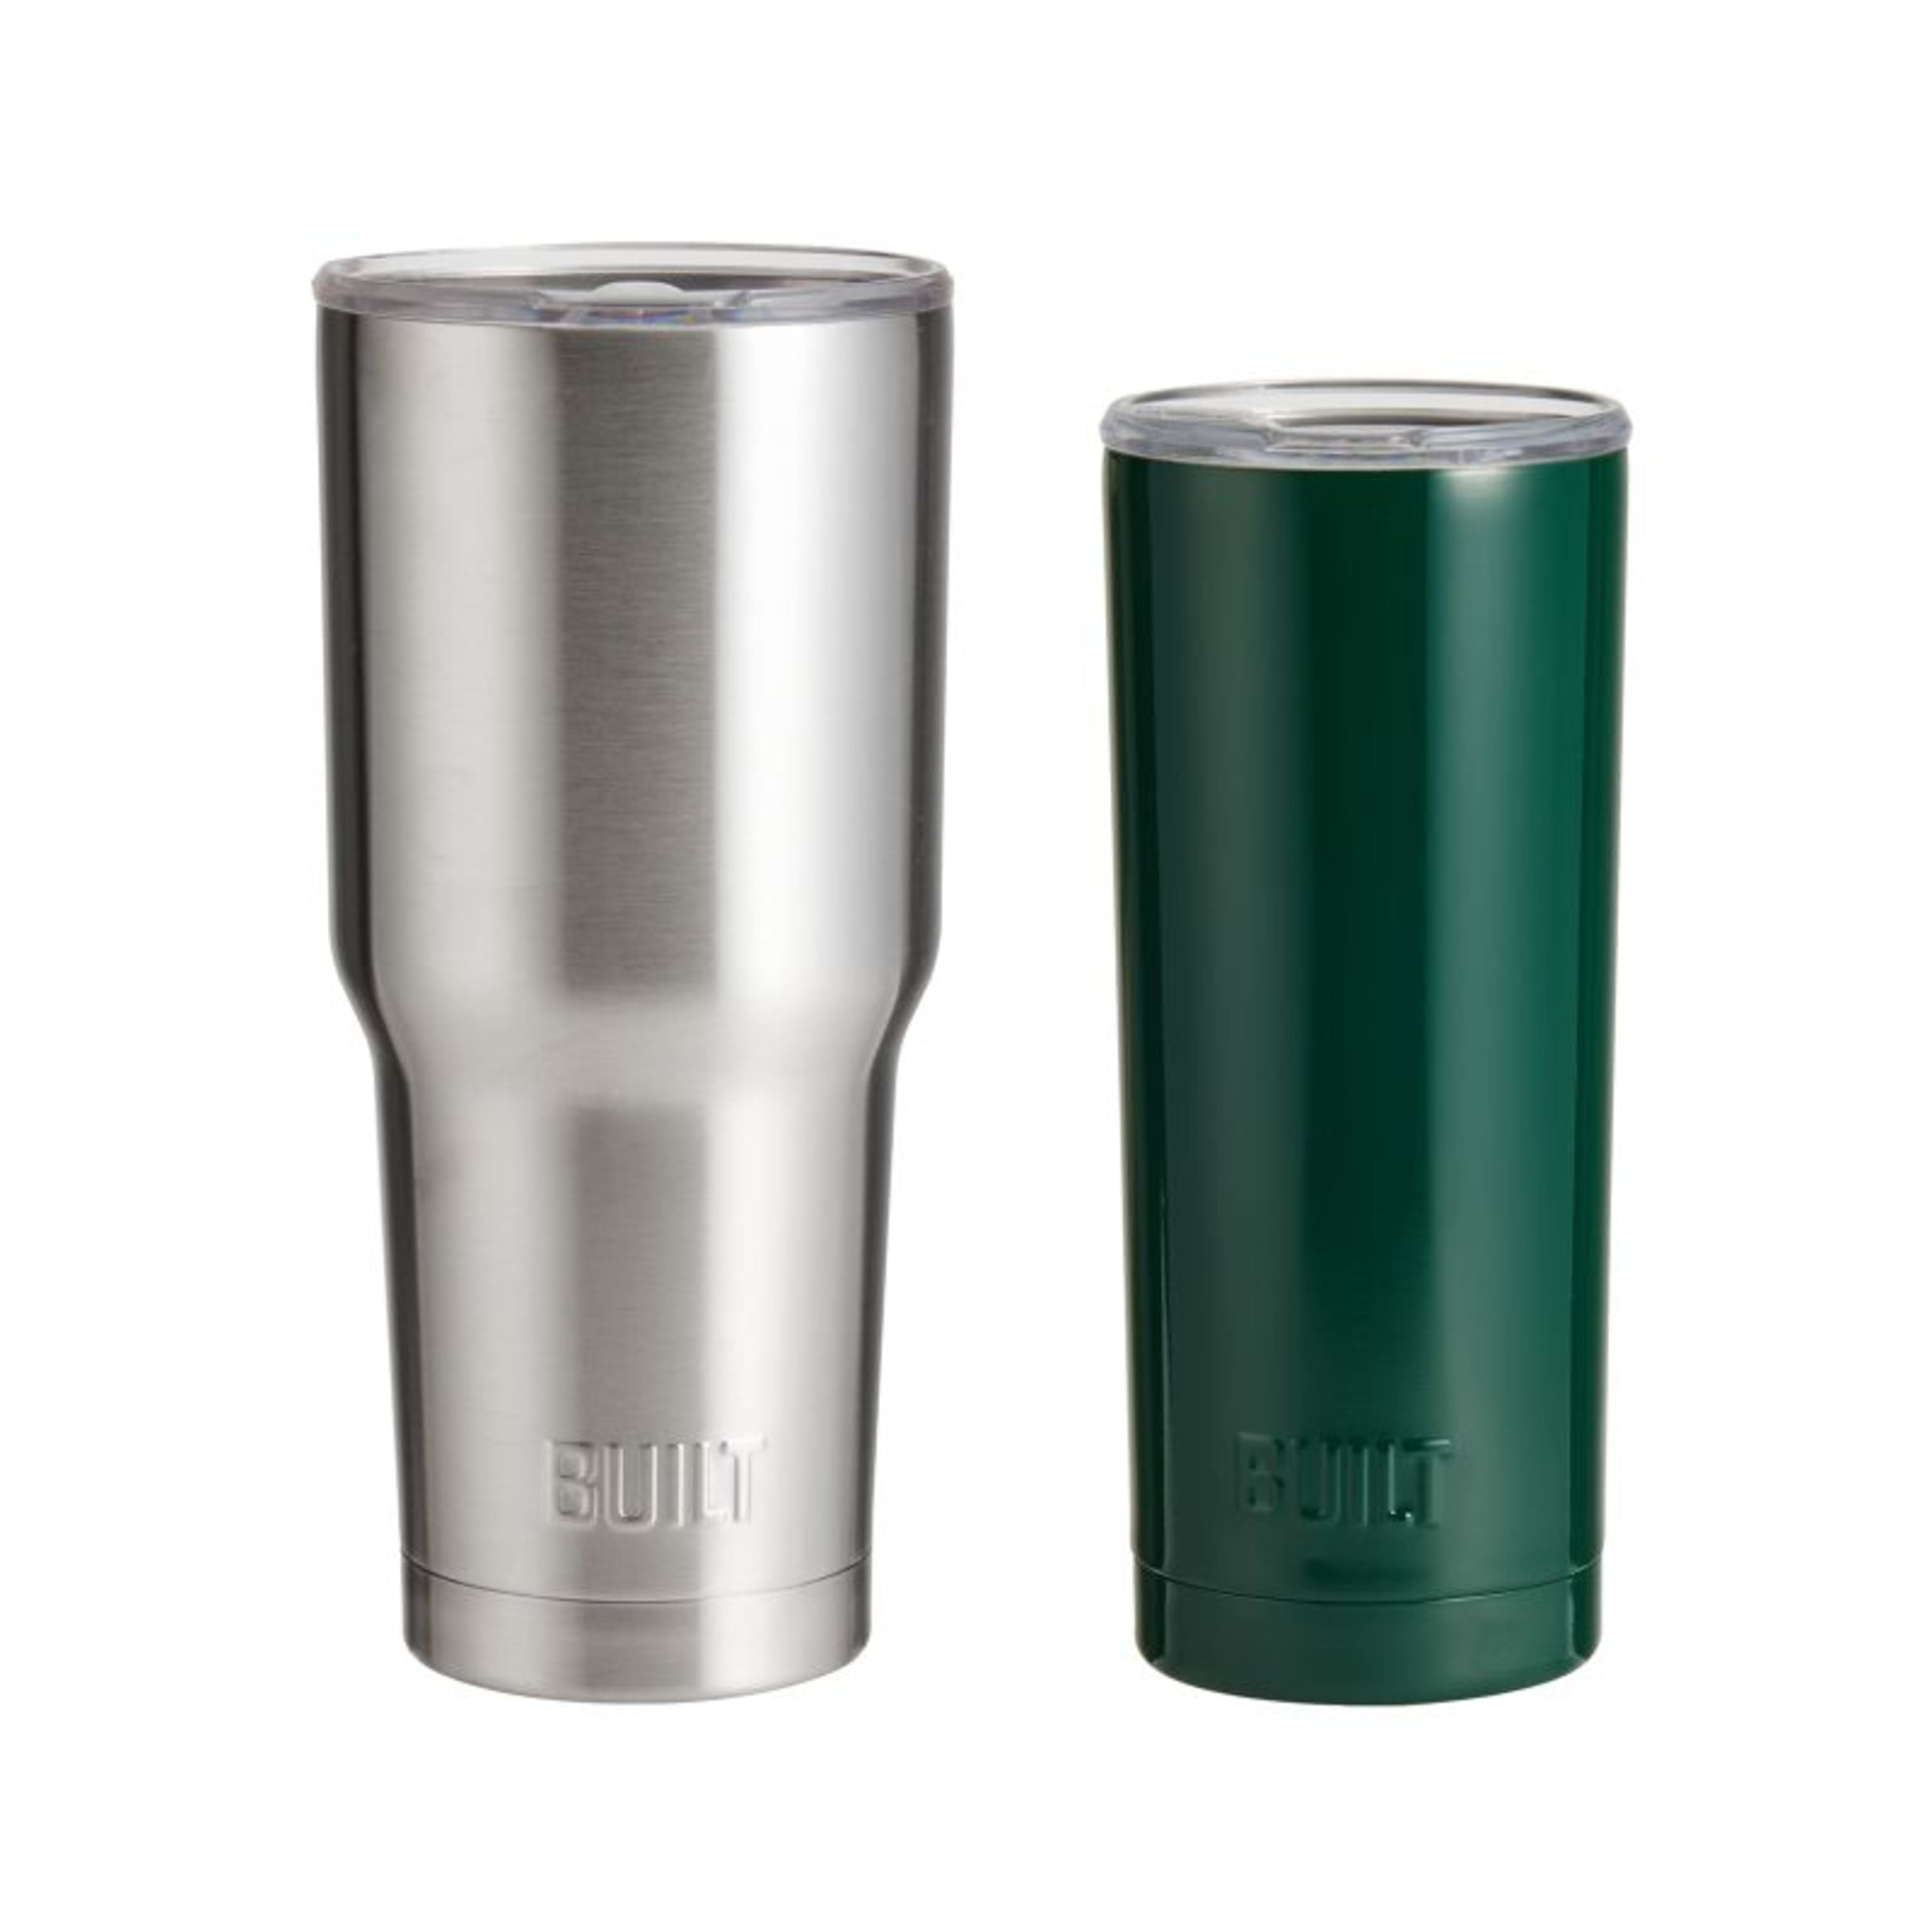 Reduce 24 oz. Dual Wall Stainless Steel Insulated Tumbler Set of 2 Green  Gray - Tumblers, Facebook Marketplace